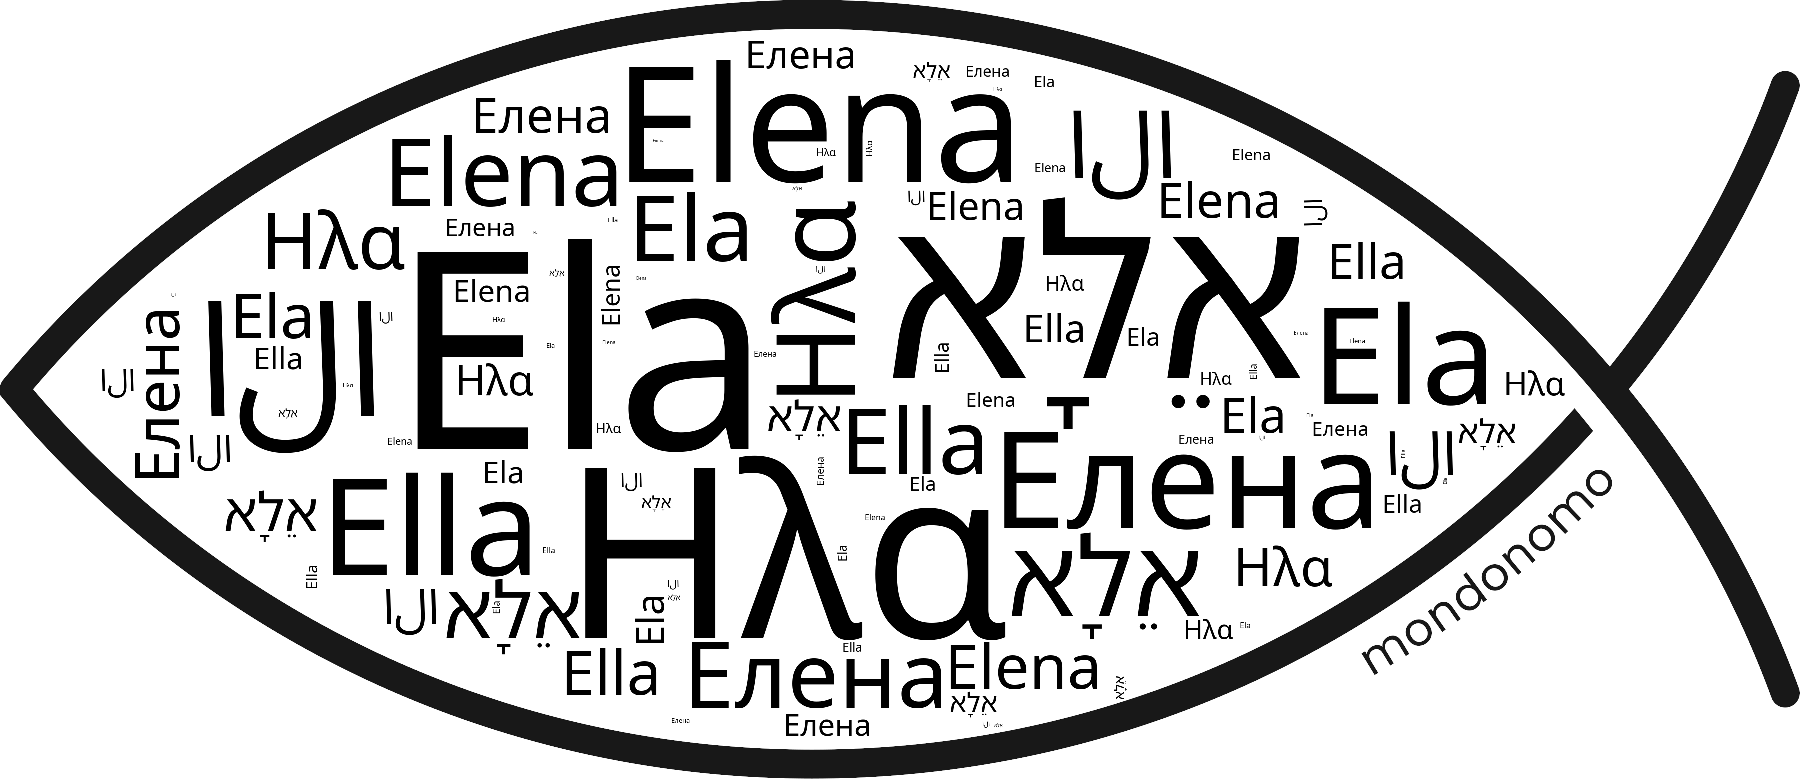 Name Ela in the world's Bibles